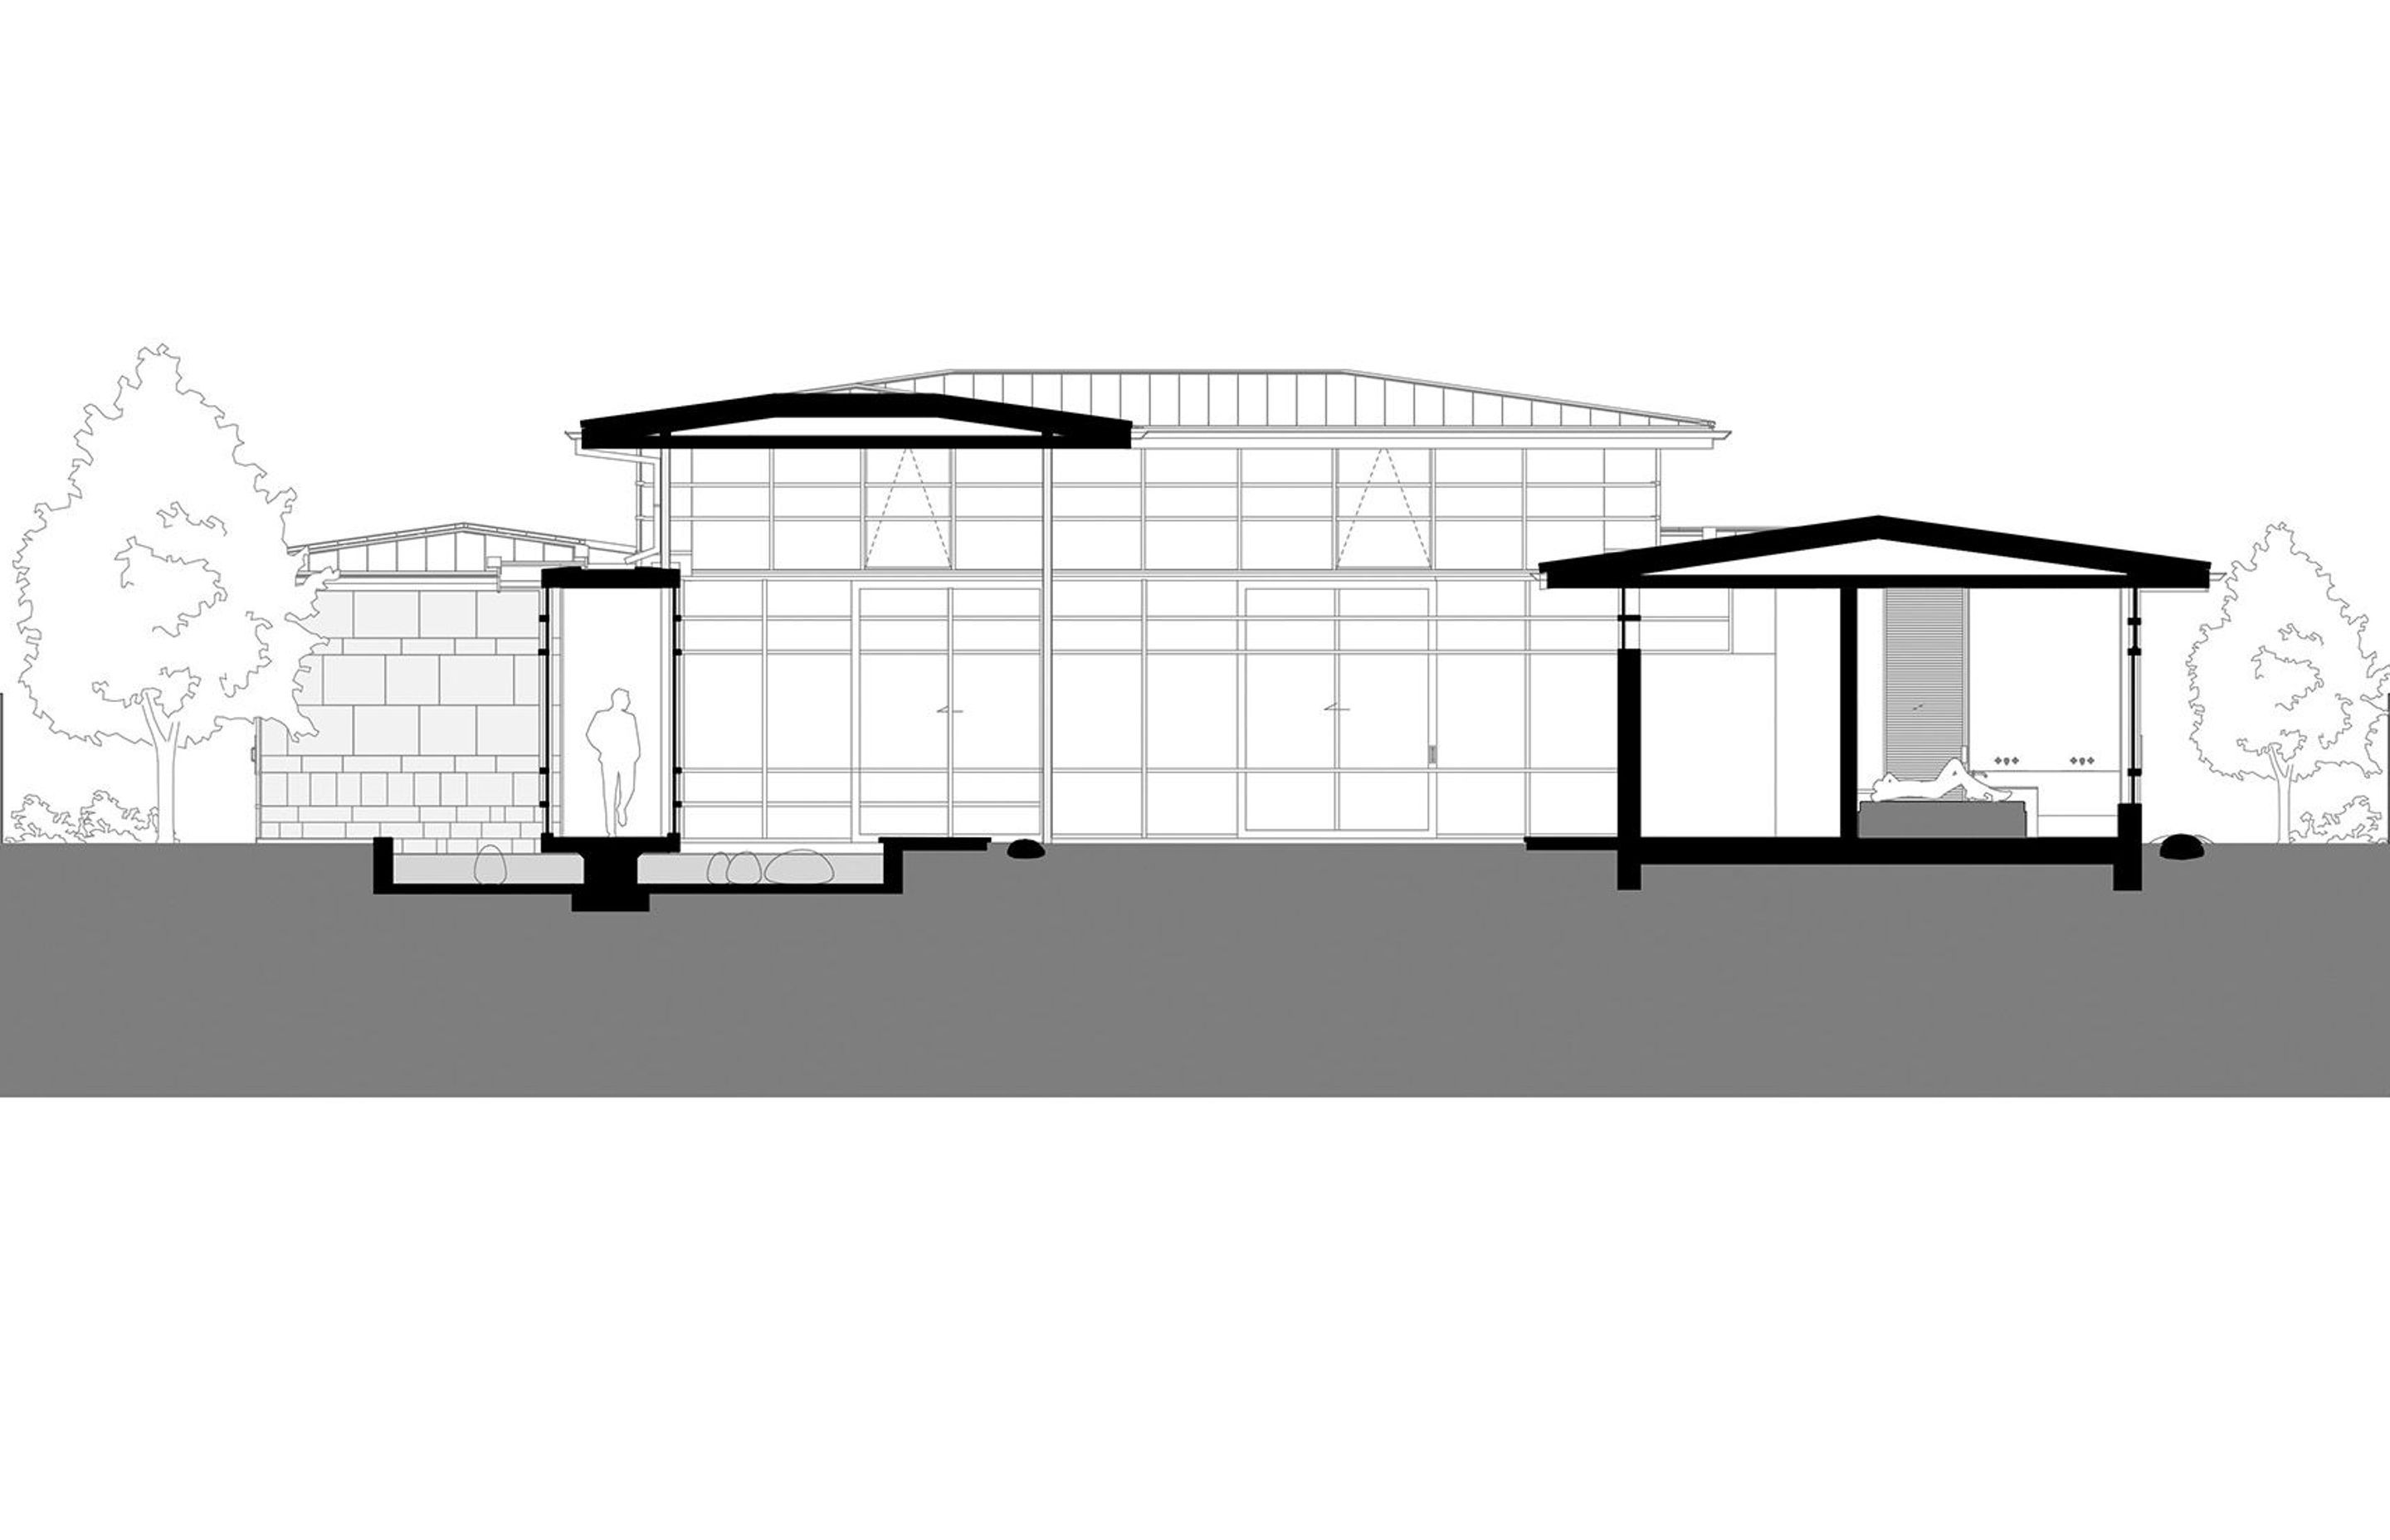 A section or slice-through of the house showing the entrance corridor on the right, across the courtyard and the master bedroom on the right side; by RB Studio.